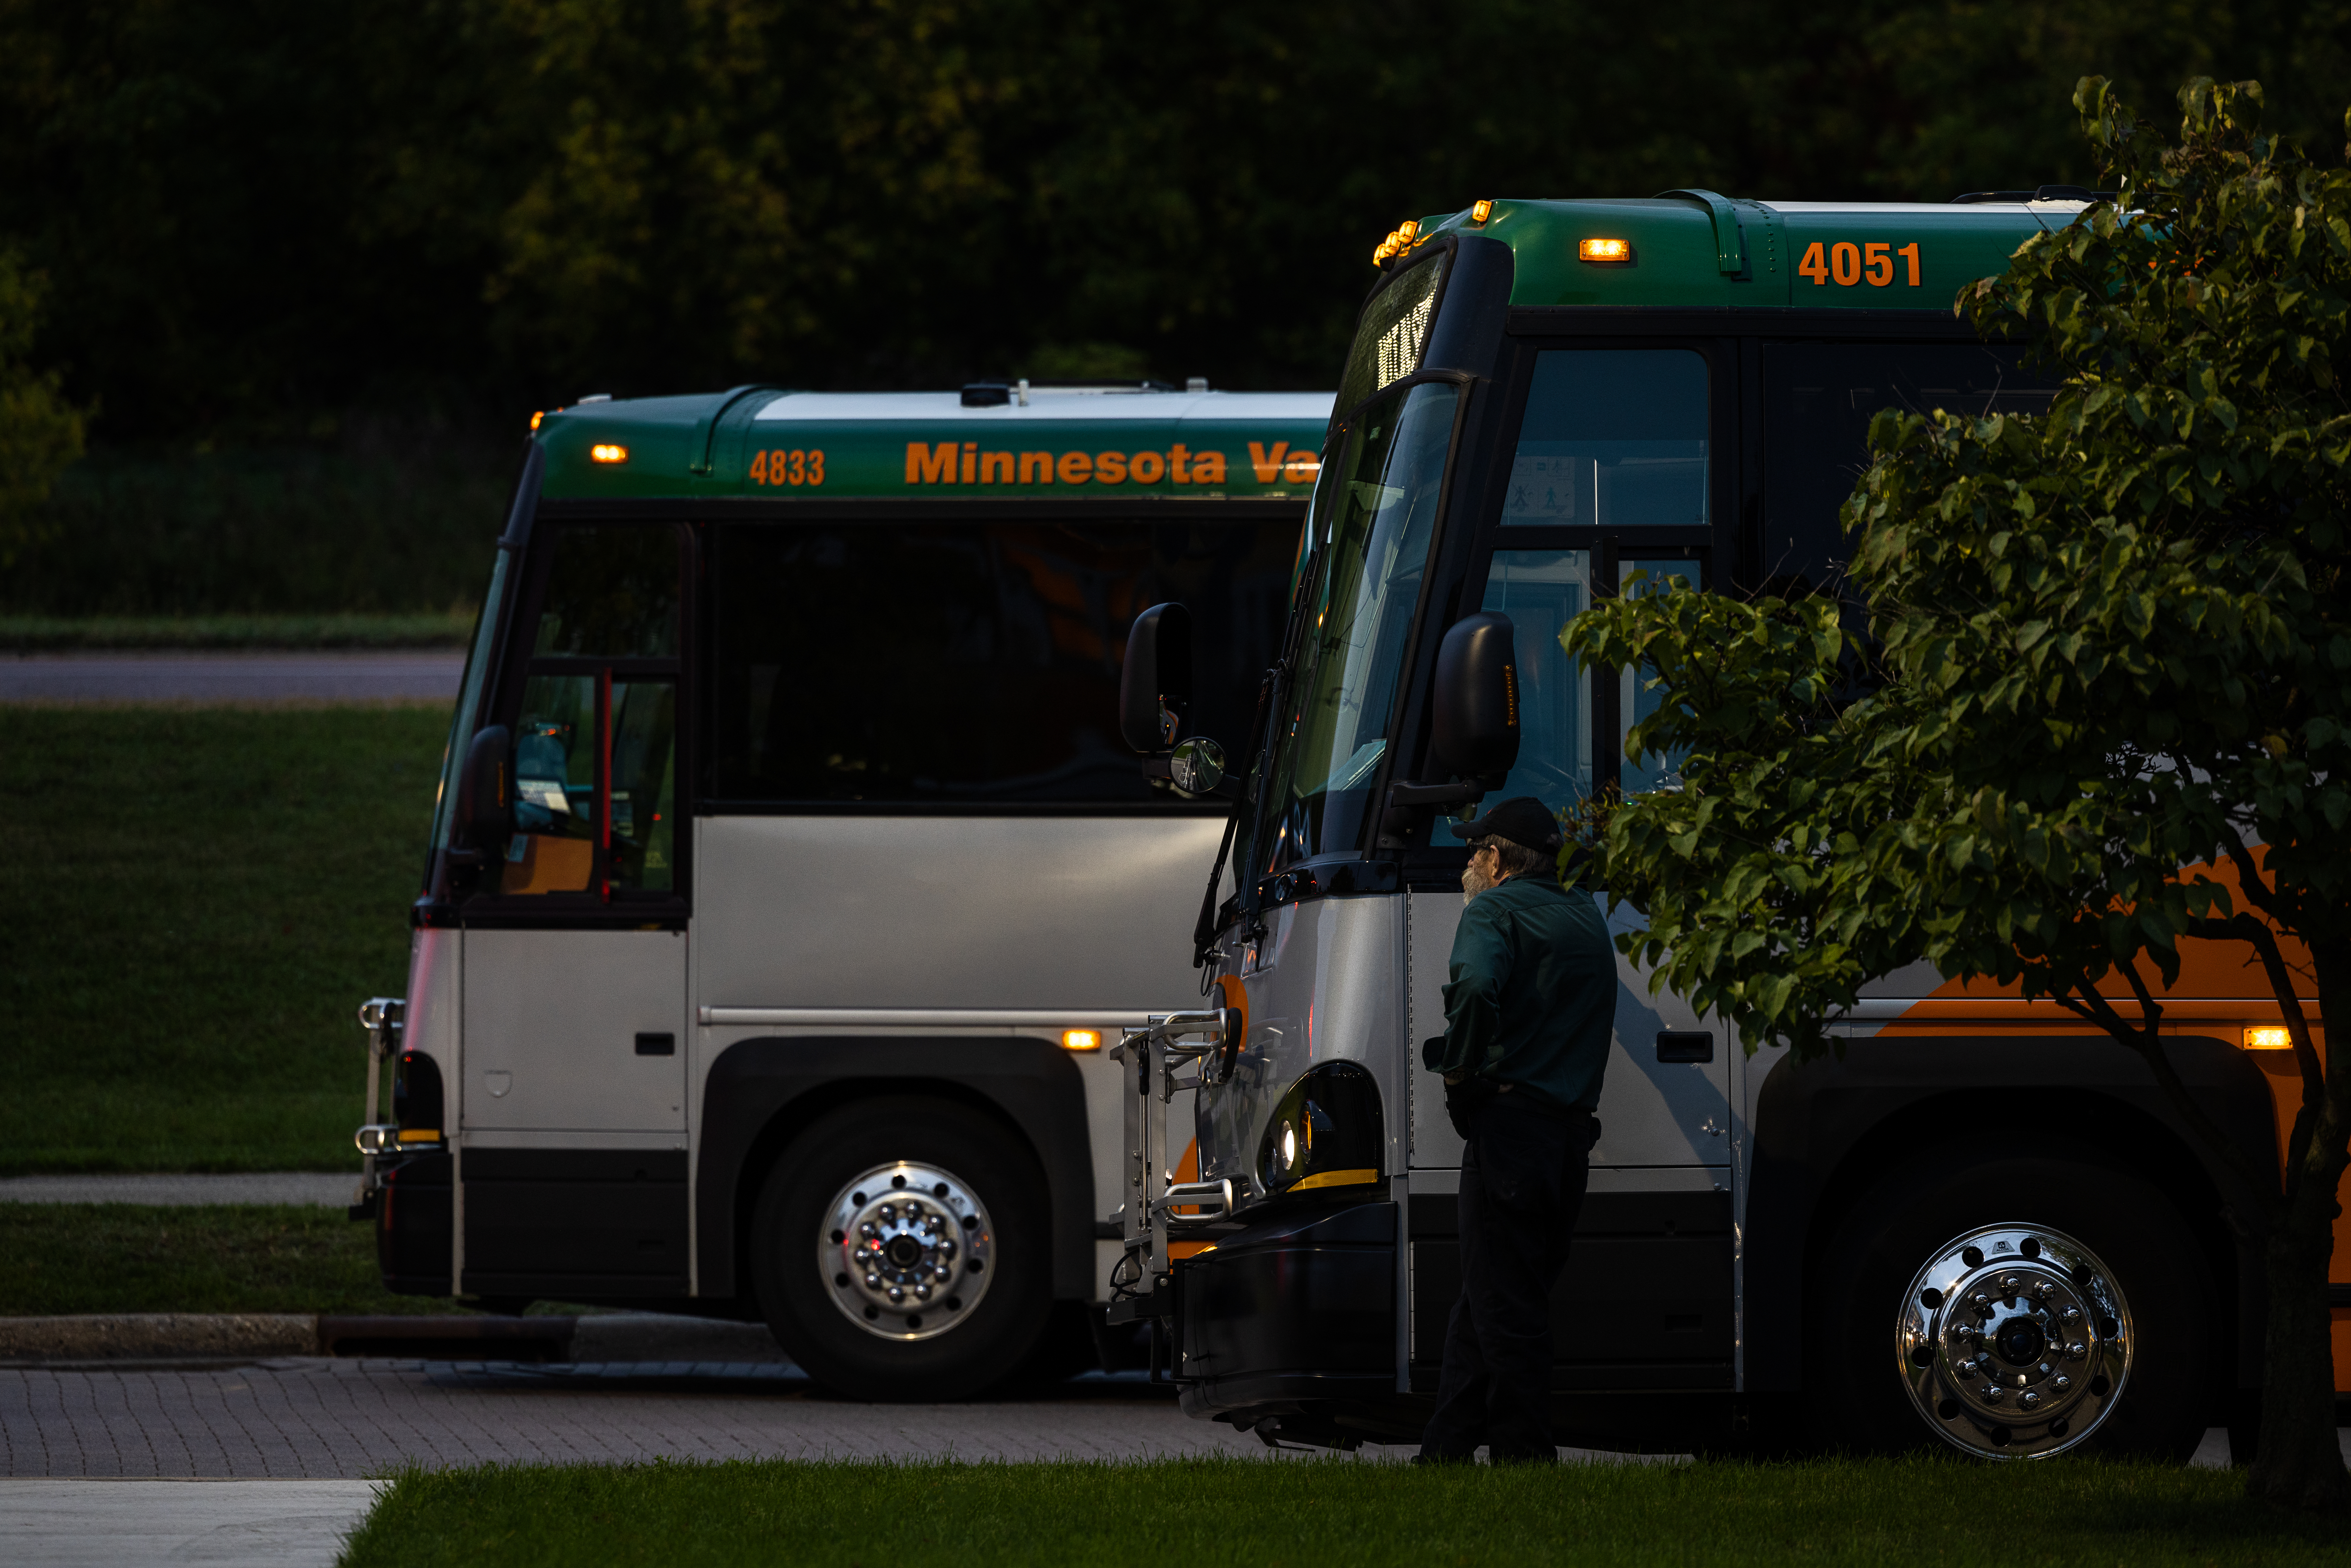 Two busses, parked side-by-side on a cobblestone street. Surrounded by grass and trees. It looks to be twilight and a bus driver is standing near his bus.